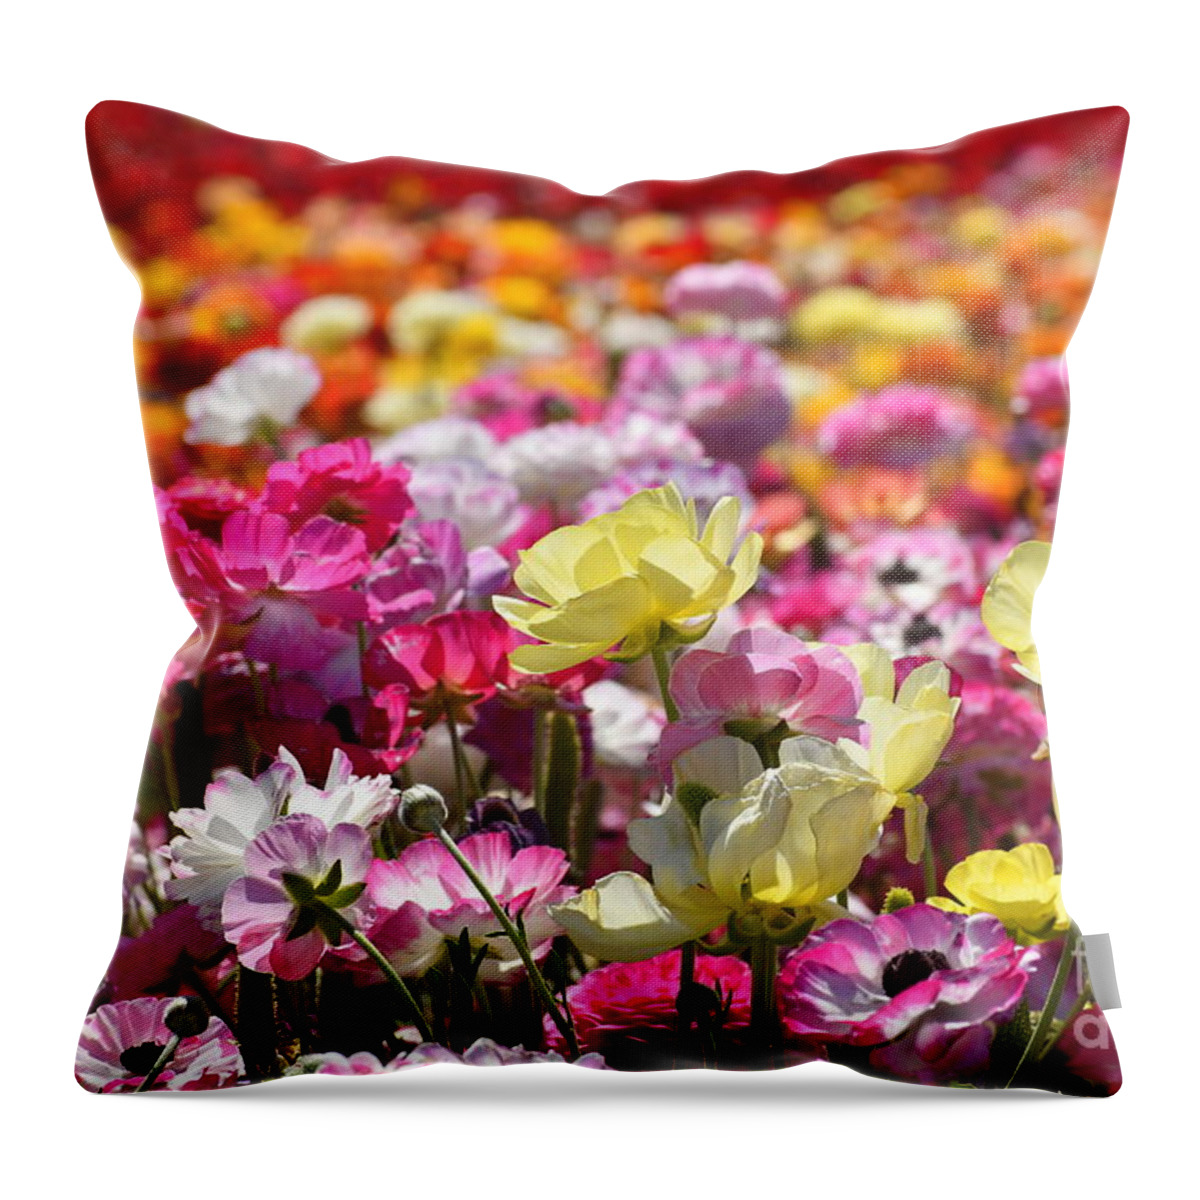 Flowers Throw Pillow featuring the photograph Colorful Flowers by Rich Cruse